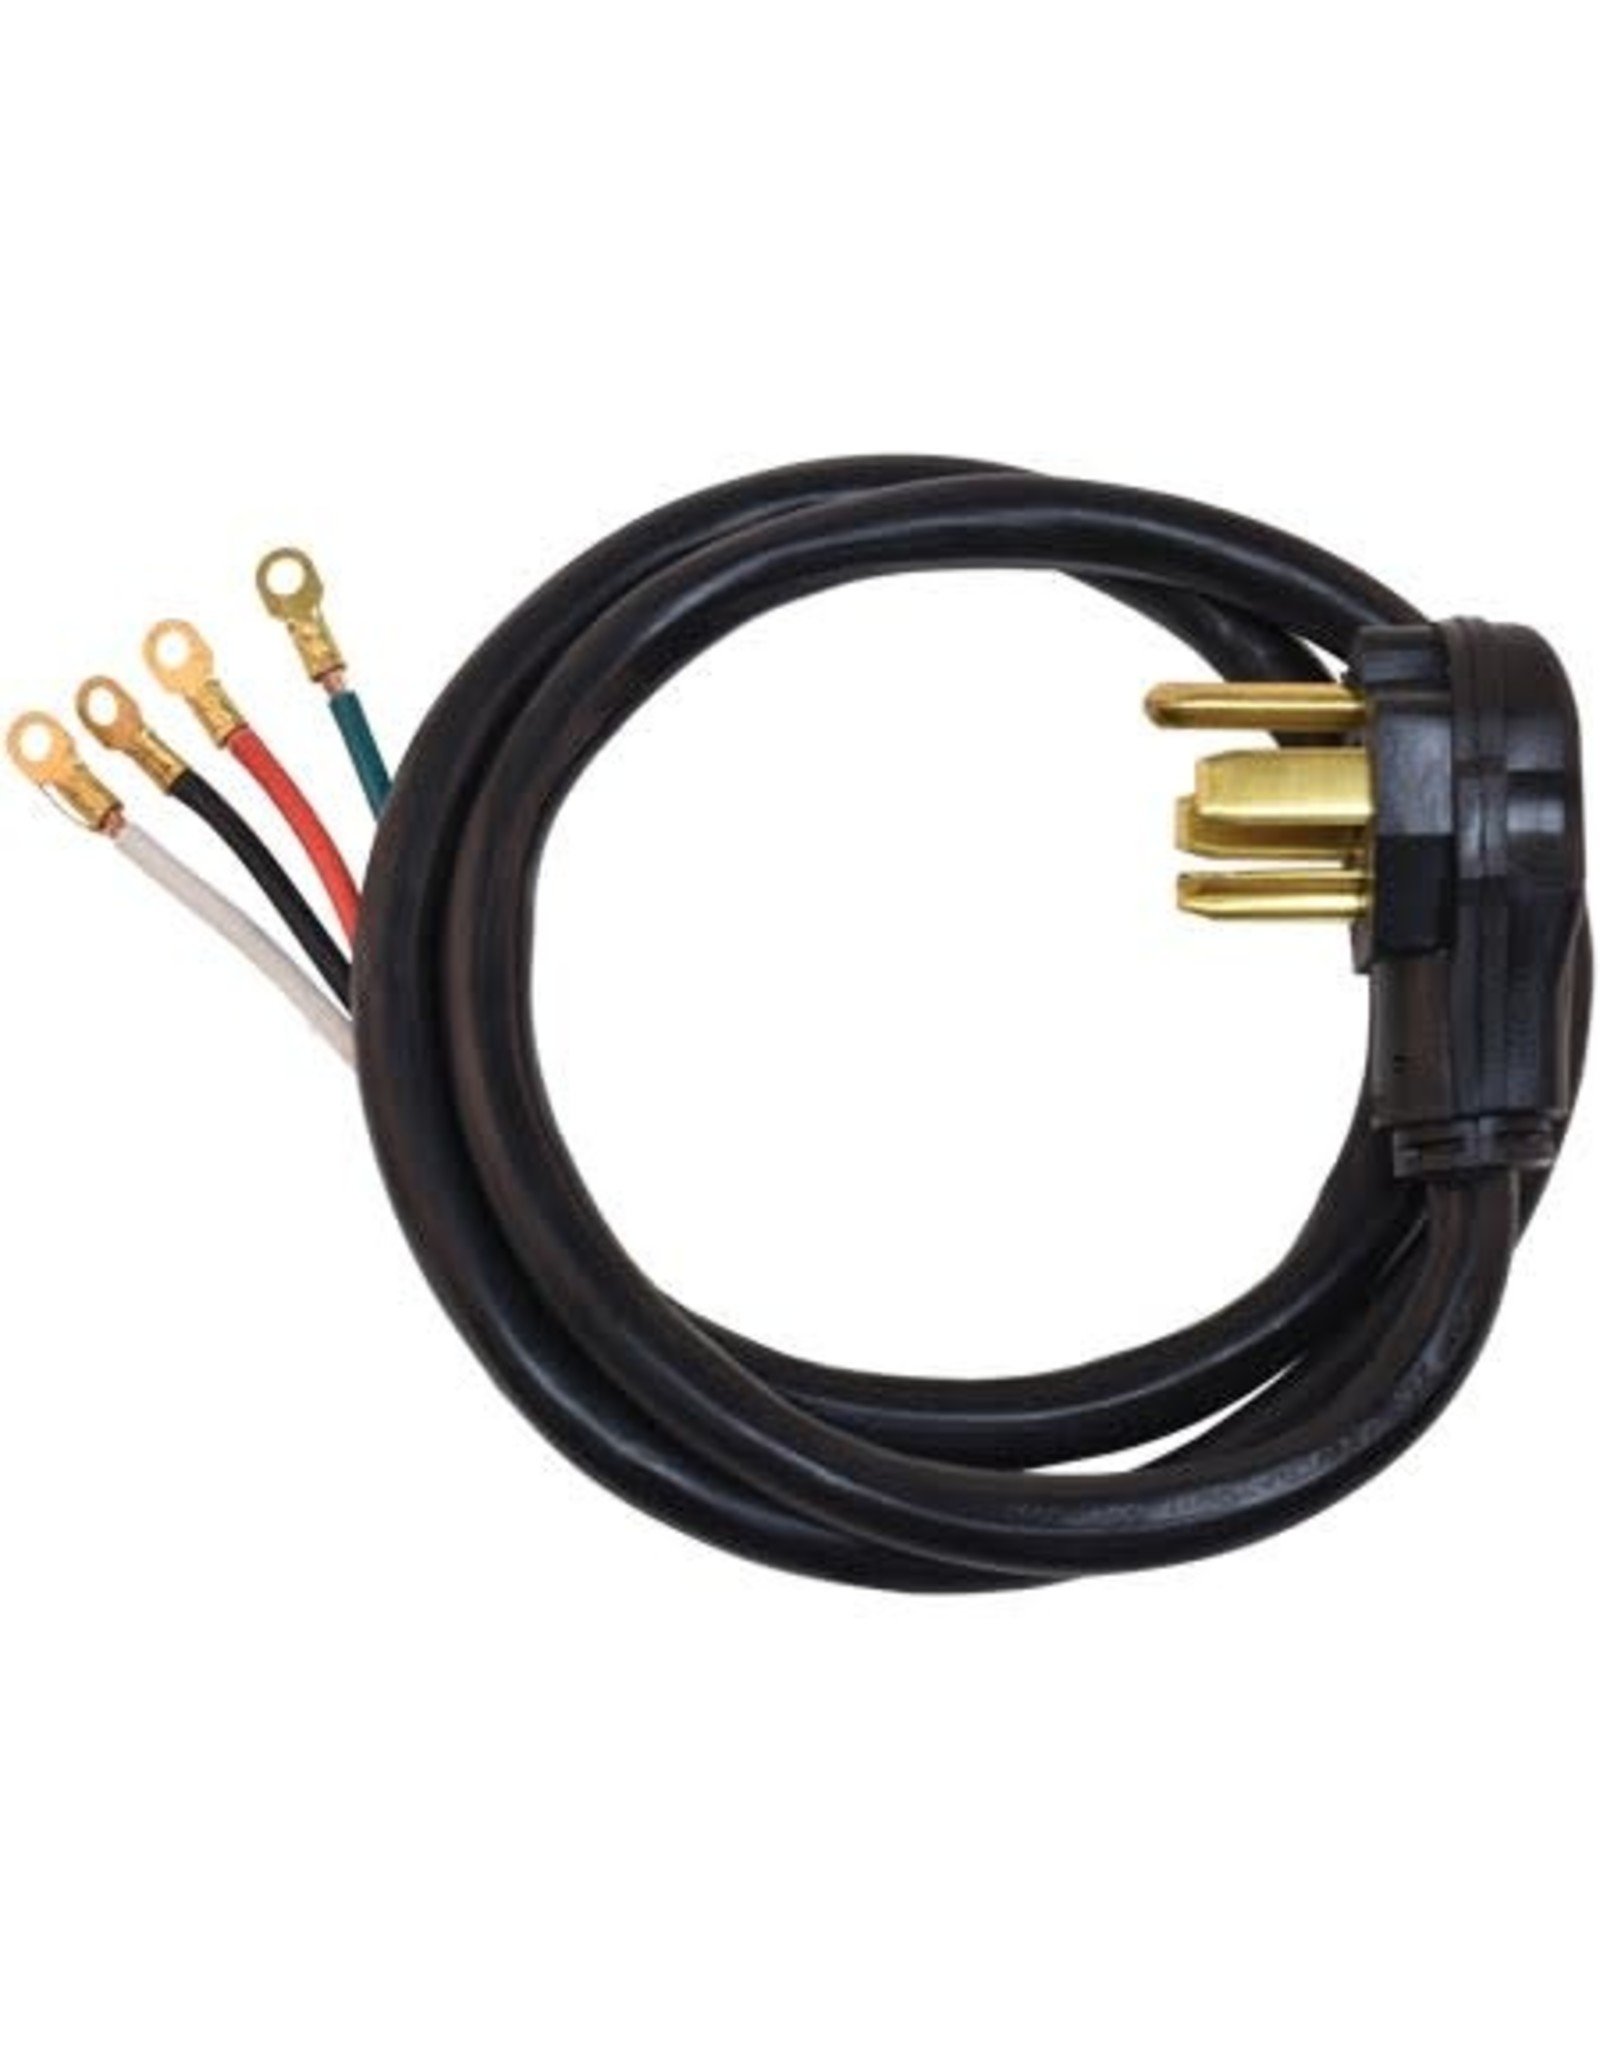 5' ELECTRICAL DRYER CORD 4 WIRE 30 AMP